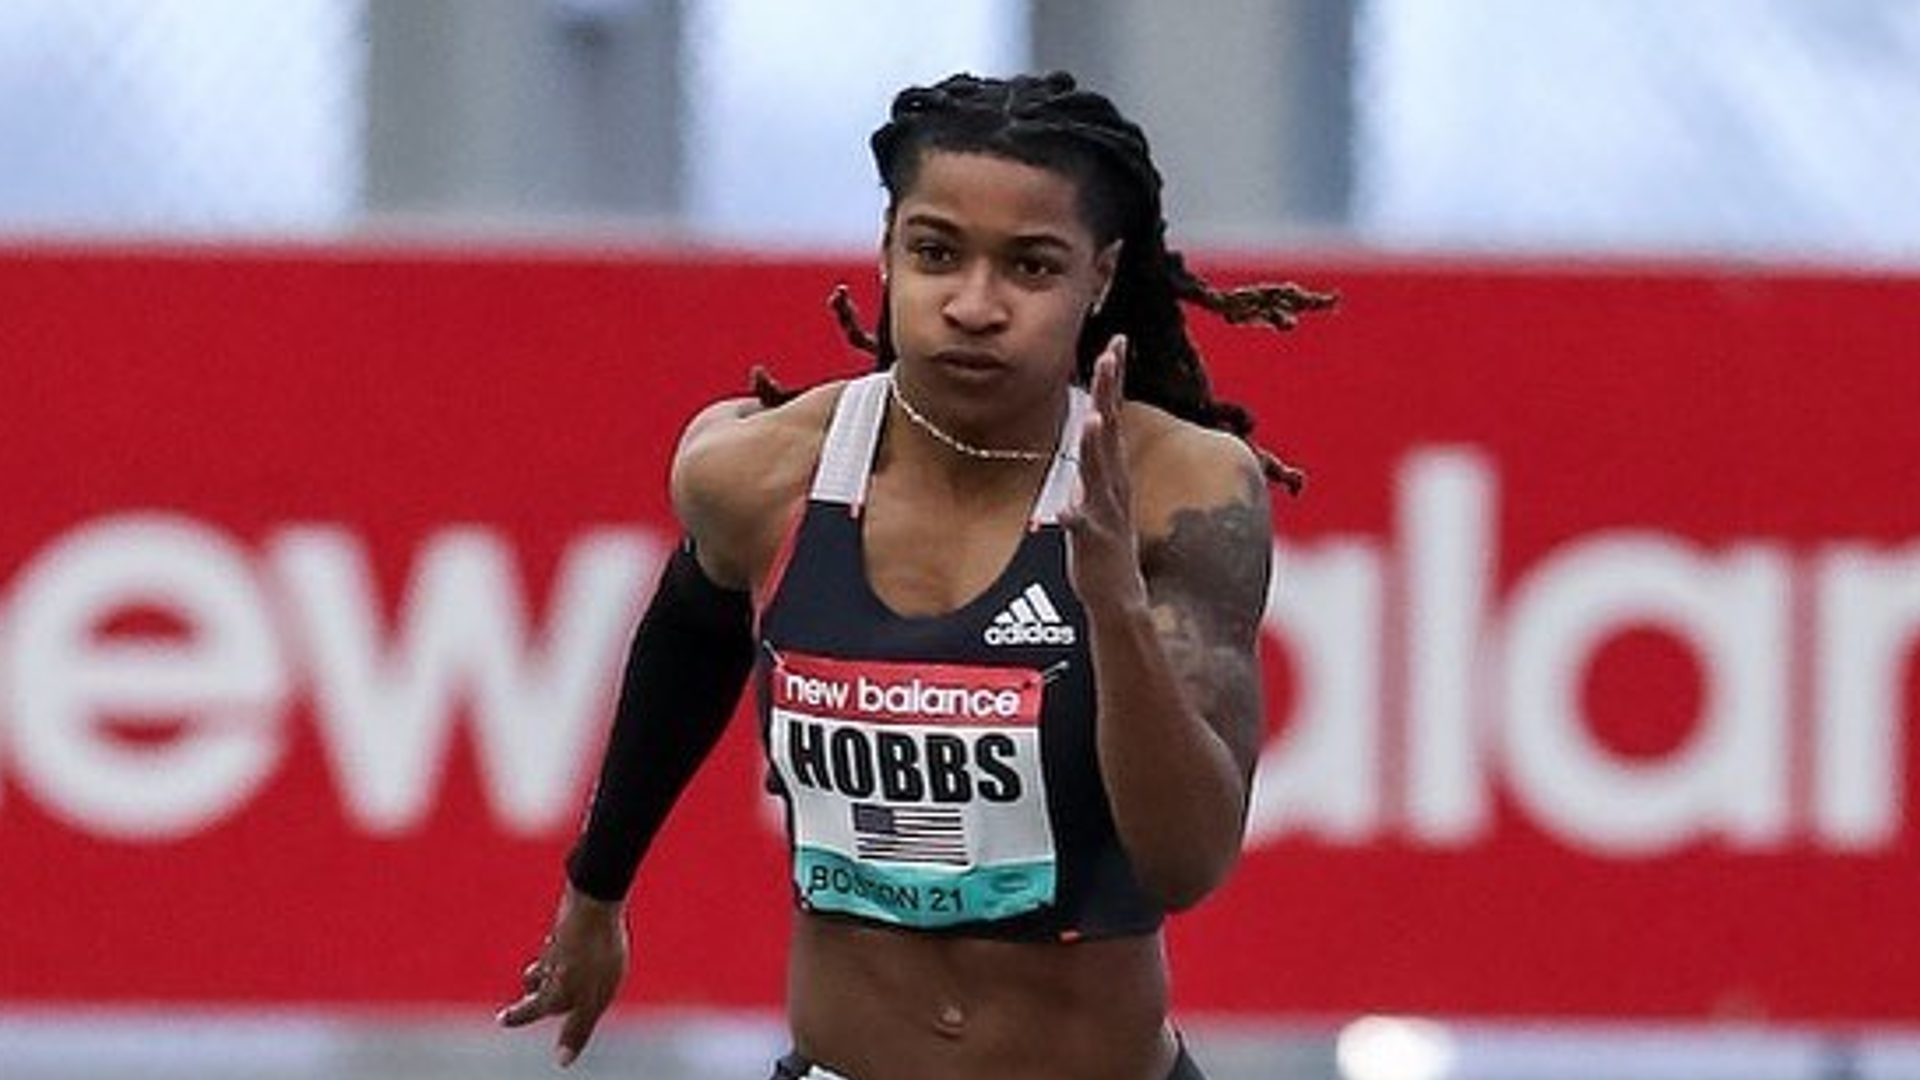 Aleia Hobbs in action at the New Balance Indoor Grand Prix 2021 (Image Credits - Instagram/ @aleiabitofthis)